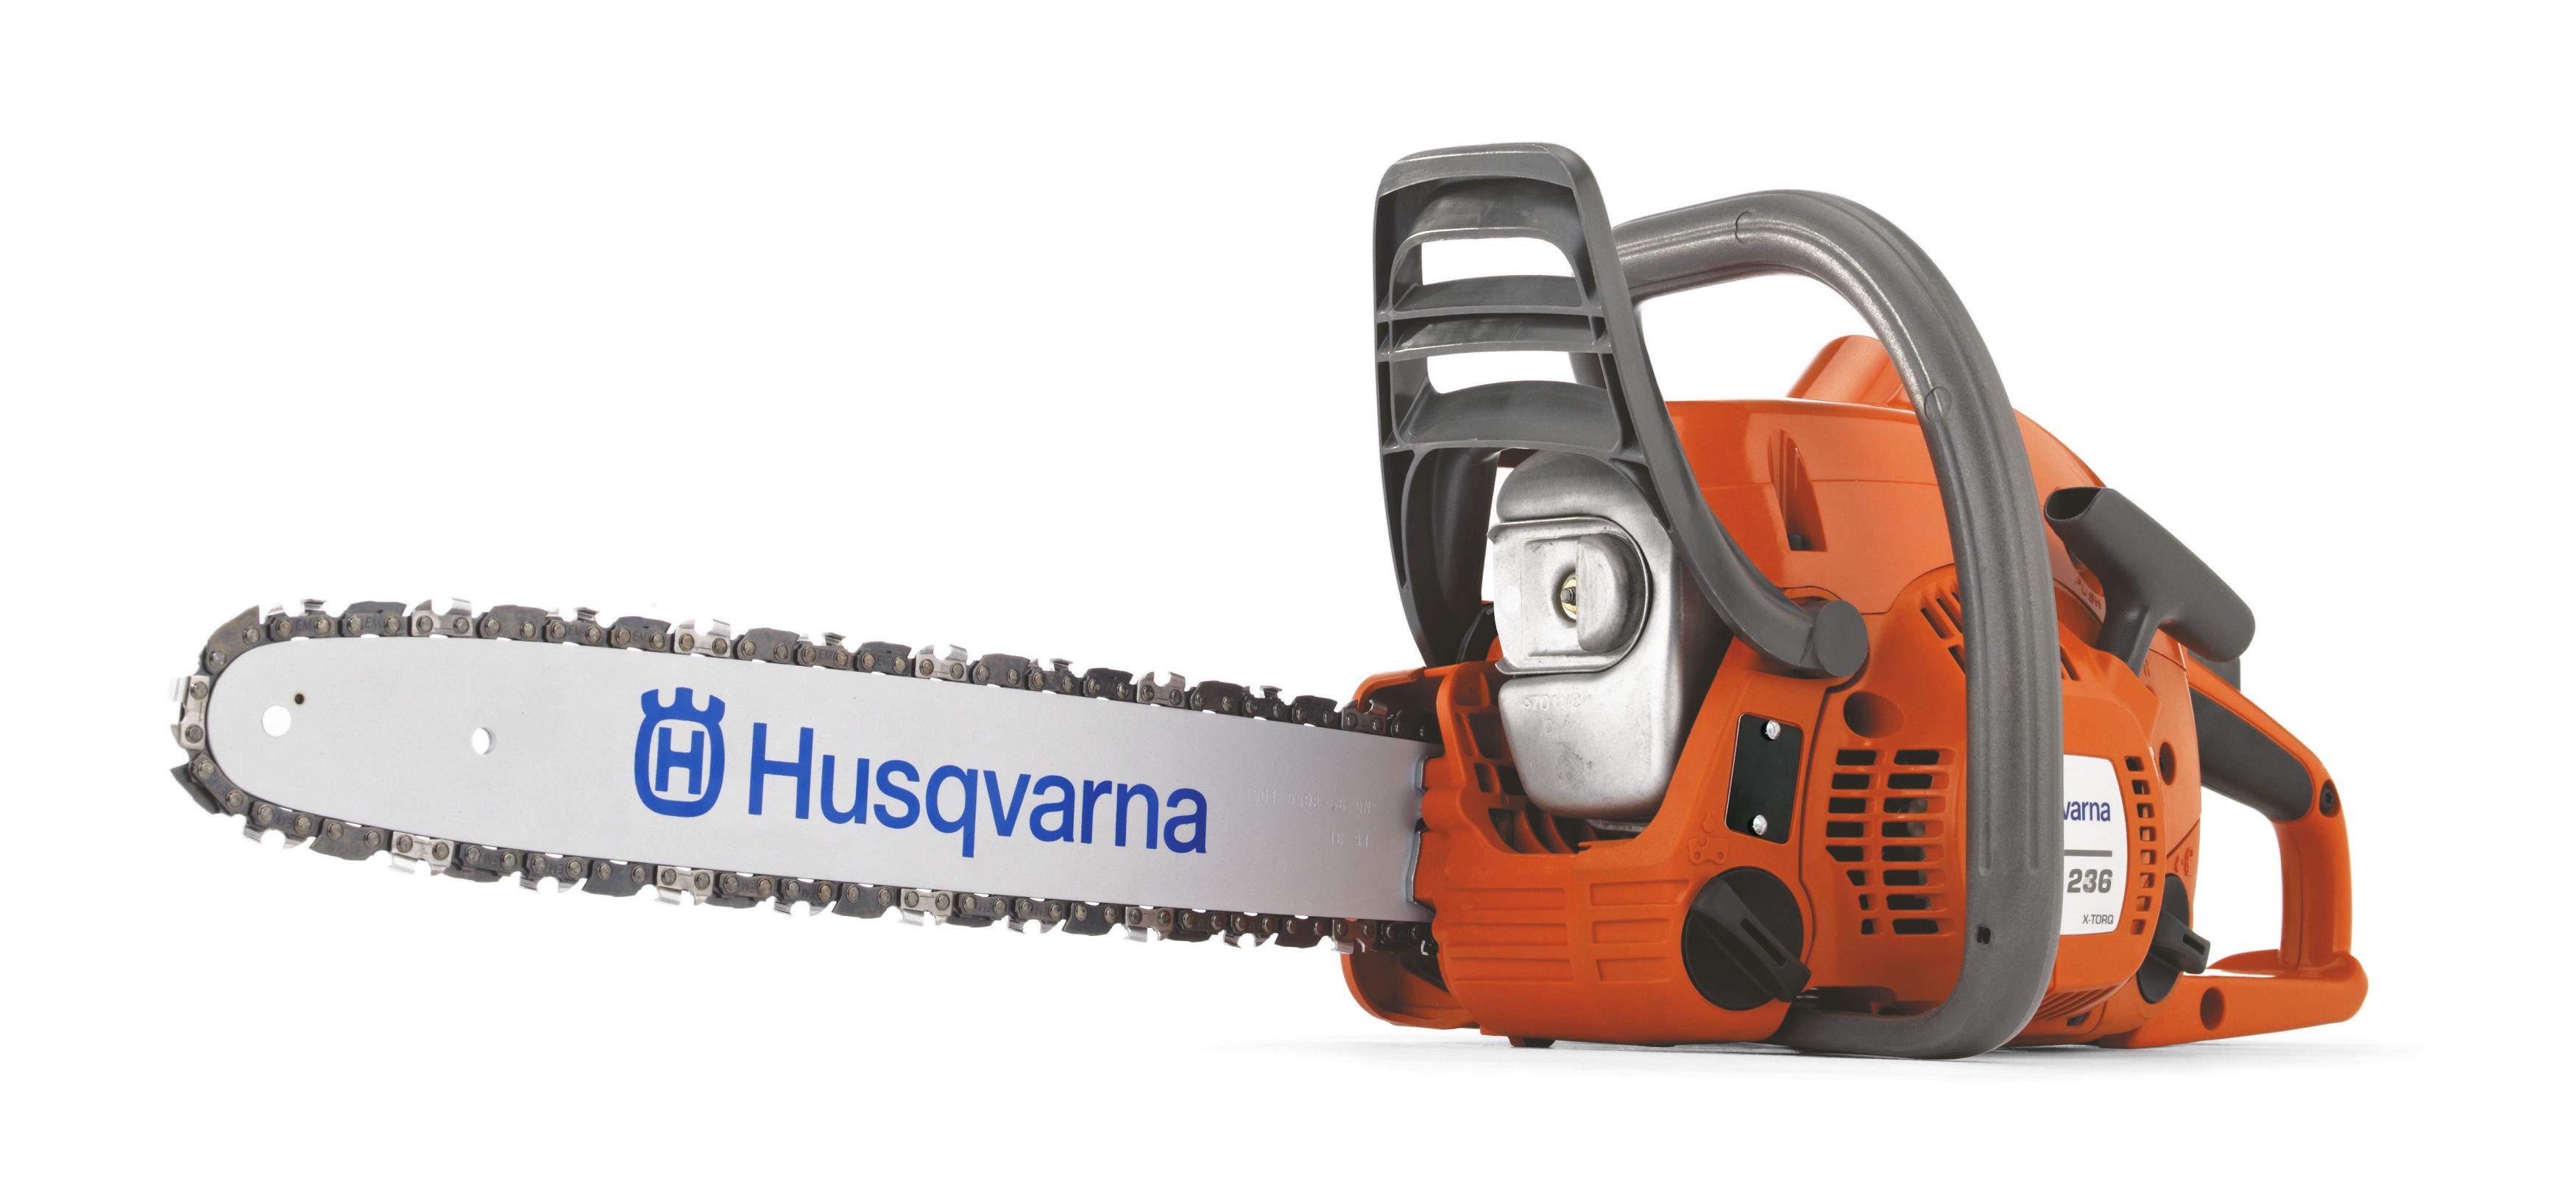 €200  Husqvarna 120 II 14inch Free Delivery Offer